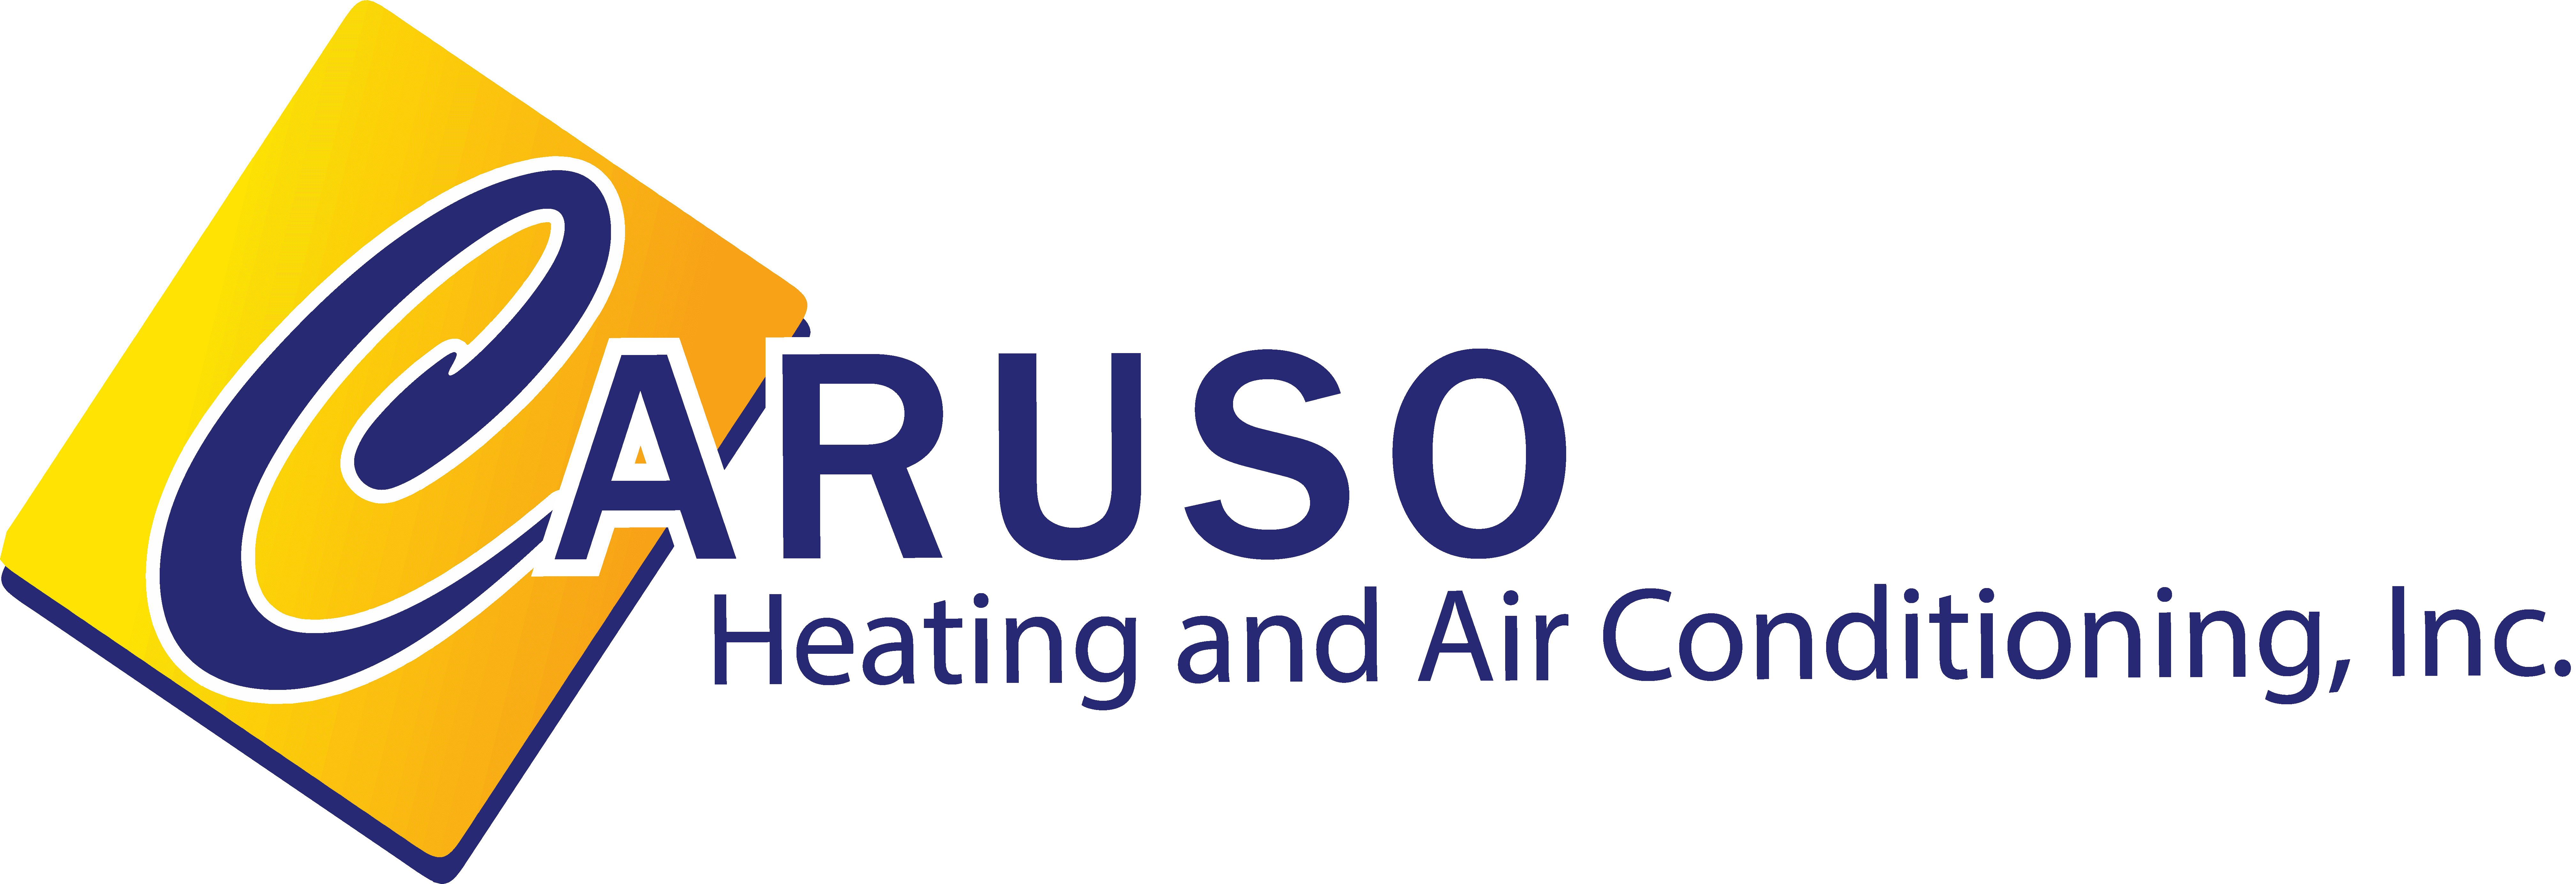 Caruso Heating and Air Conditioning